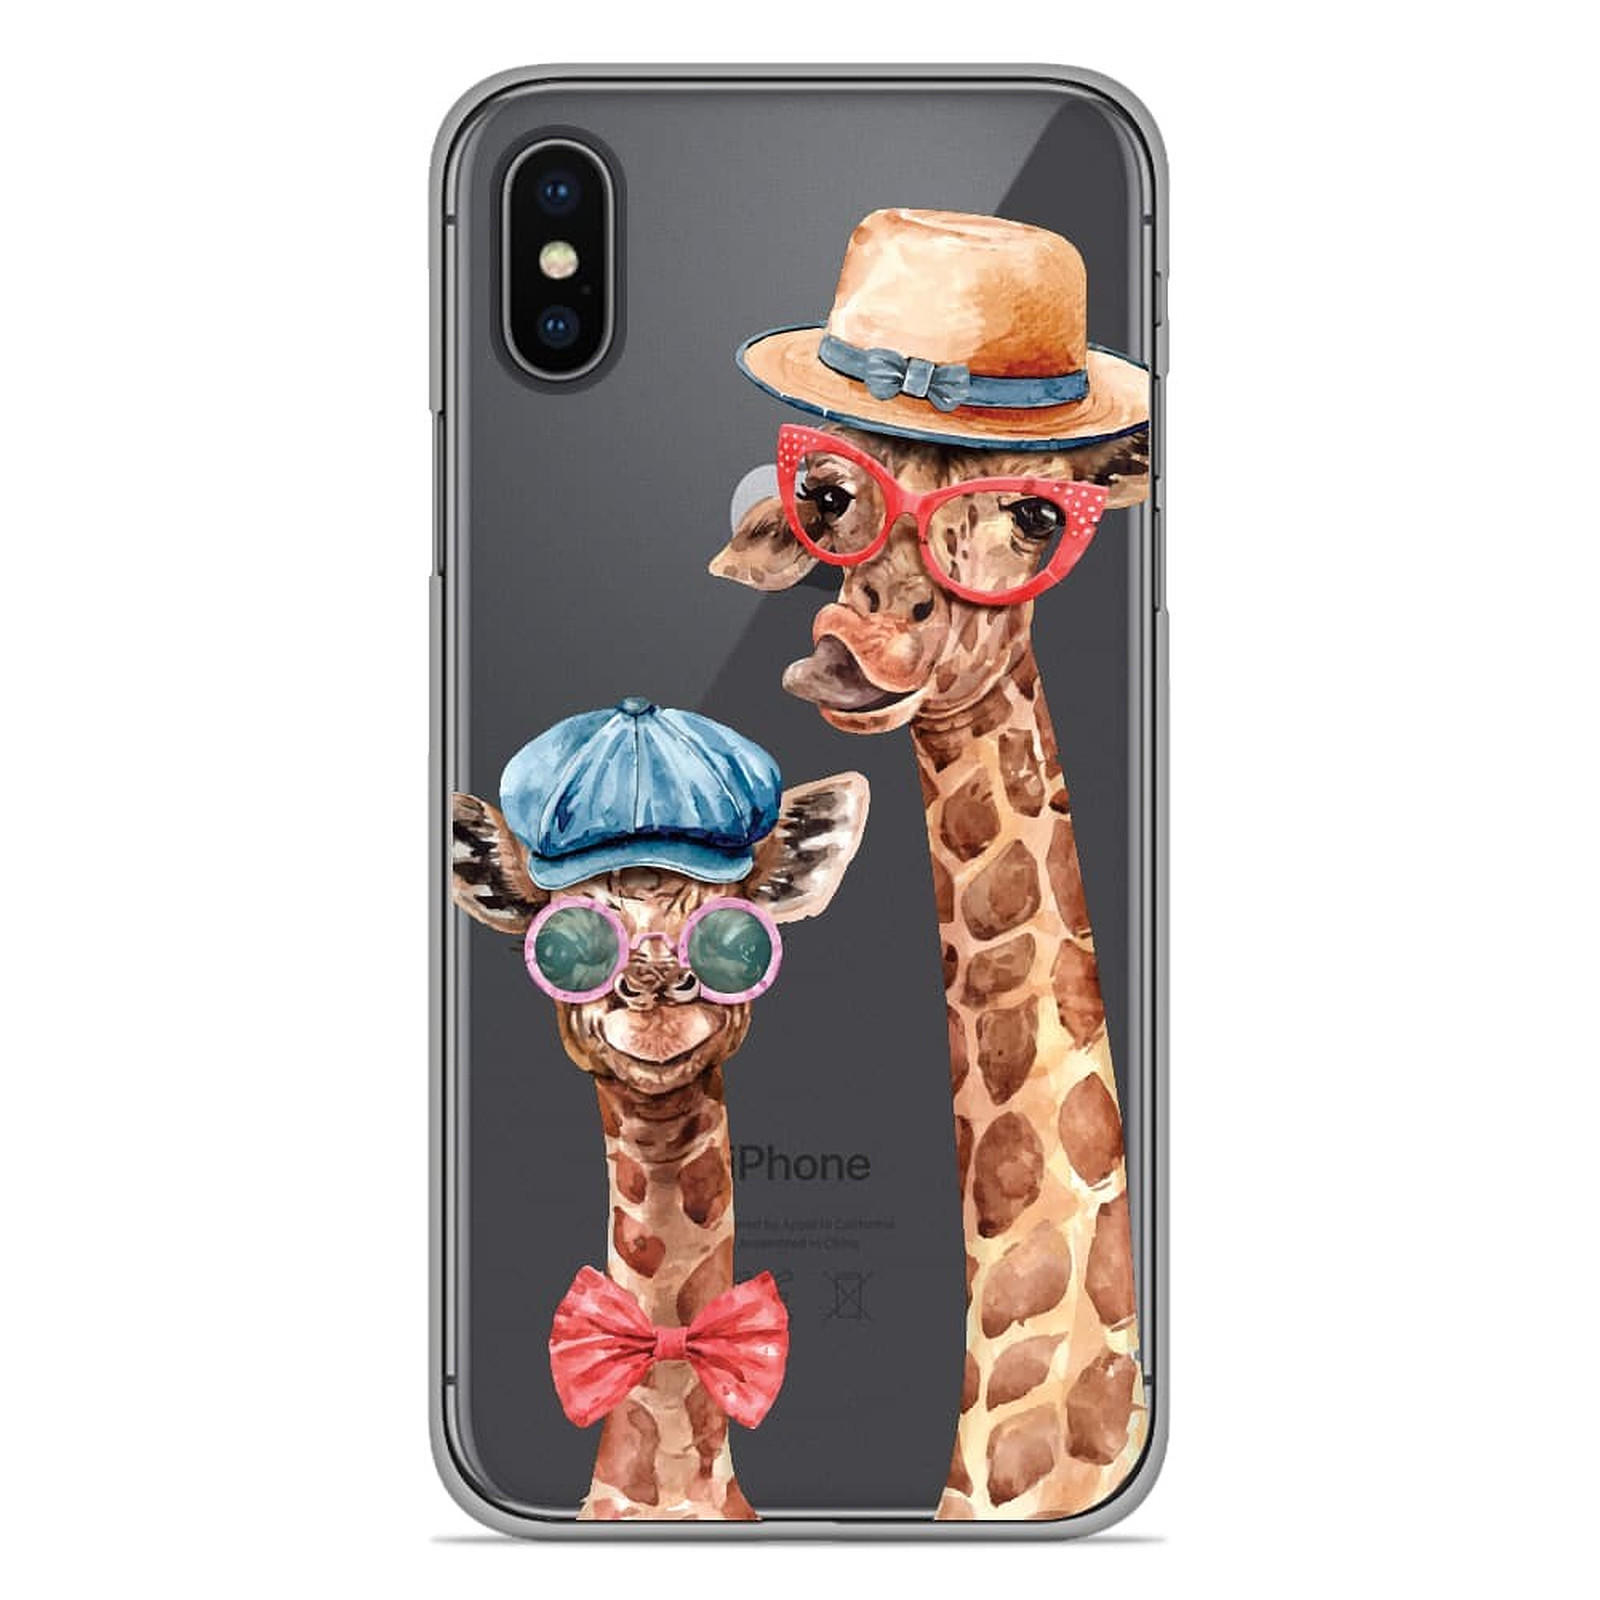 1001 Coques Coque silicone gel Apple iPhone XS Max motif Funny Girafe - Coque telephone 1001Coques